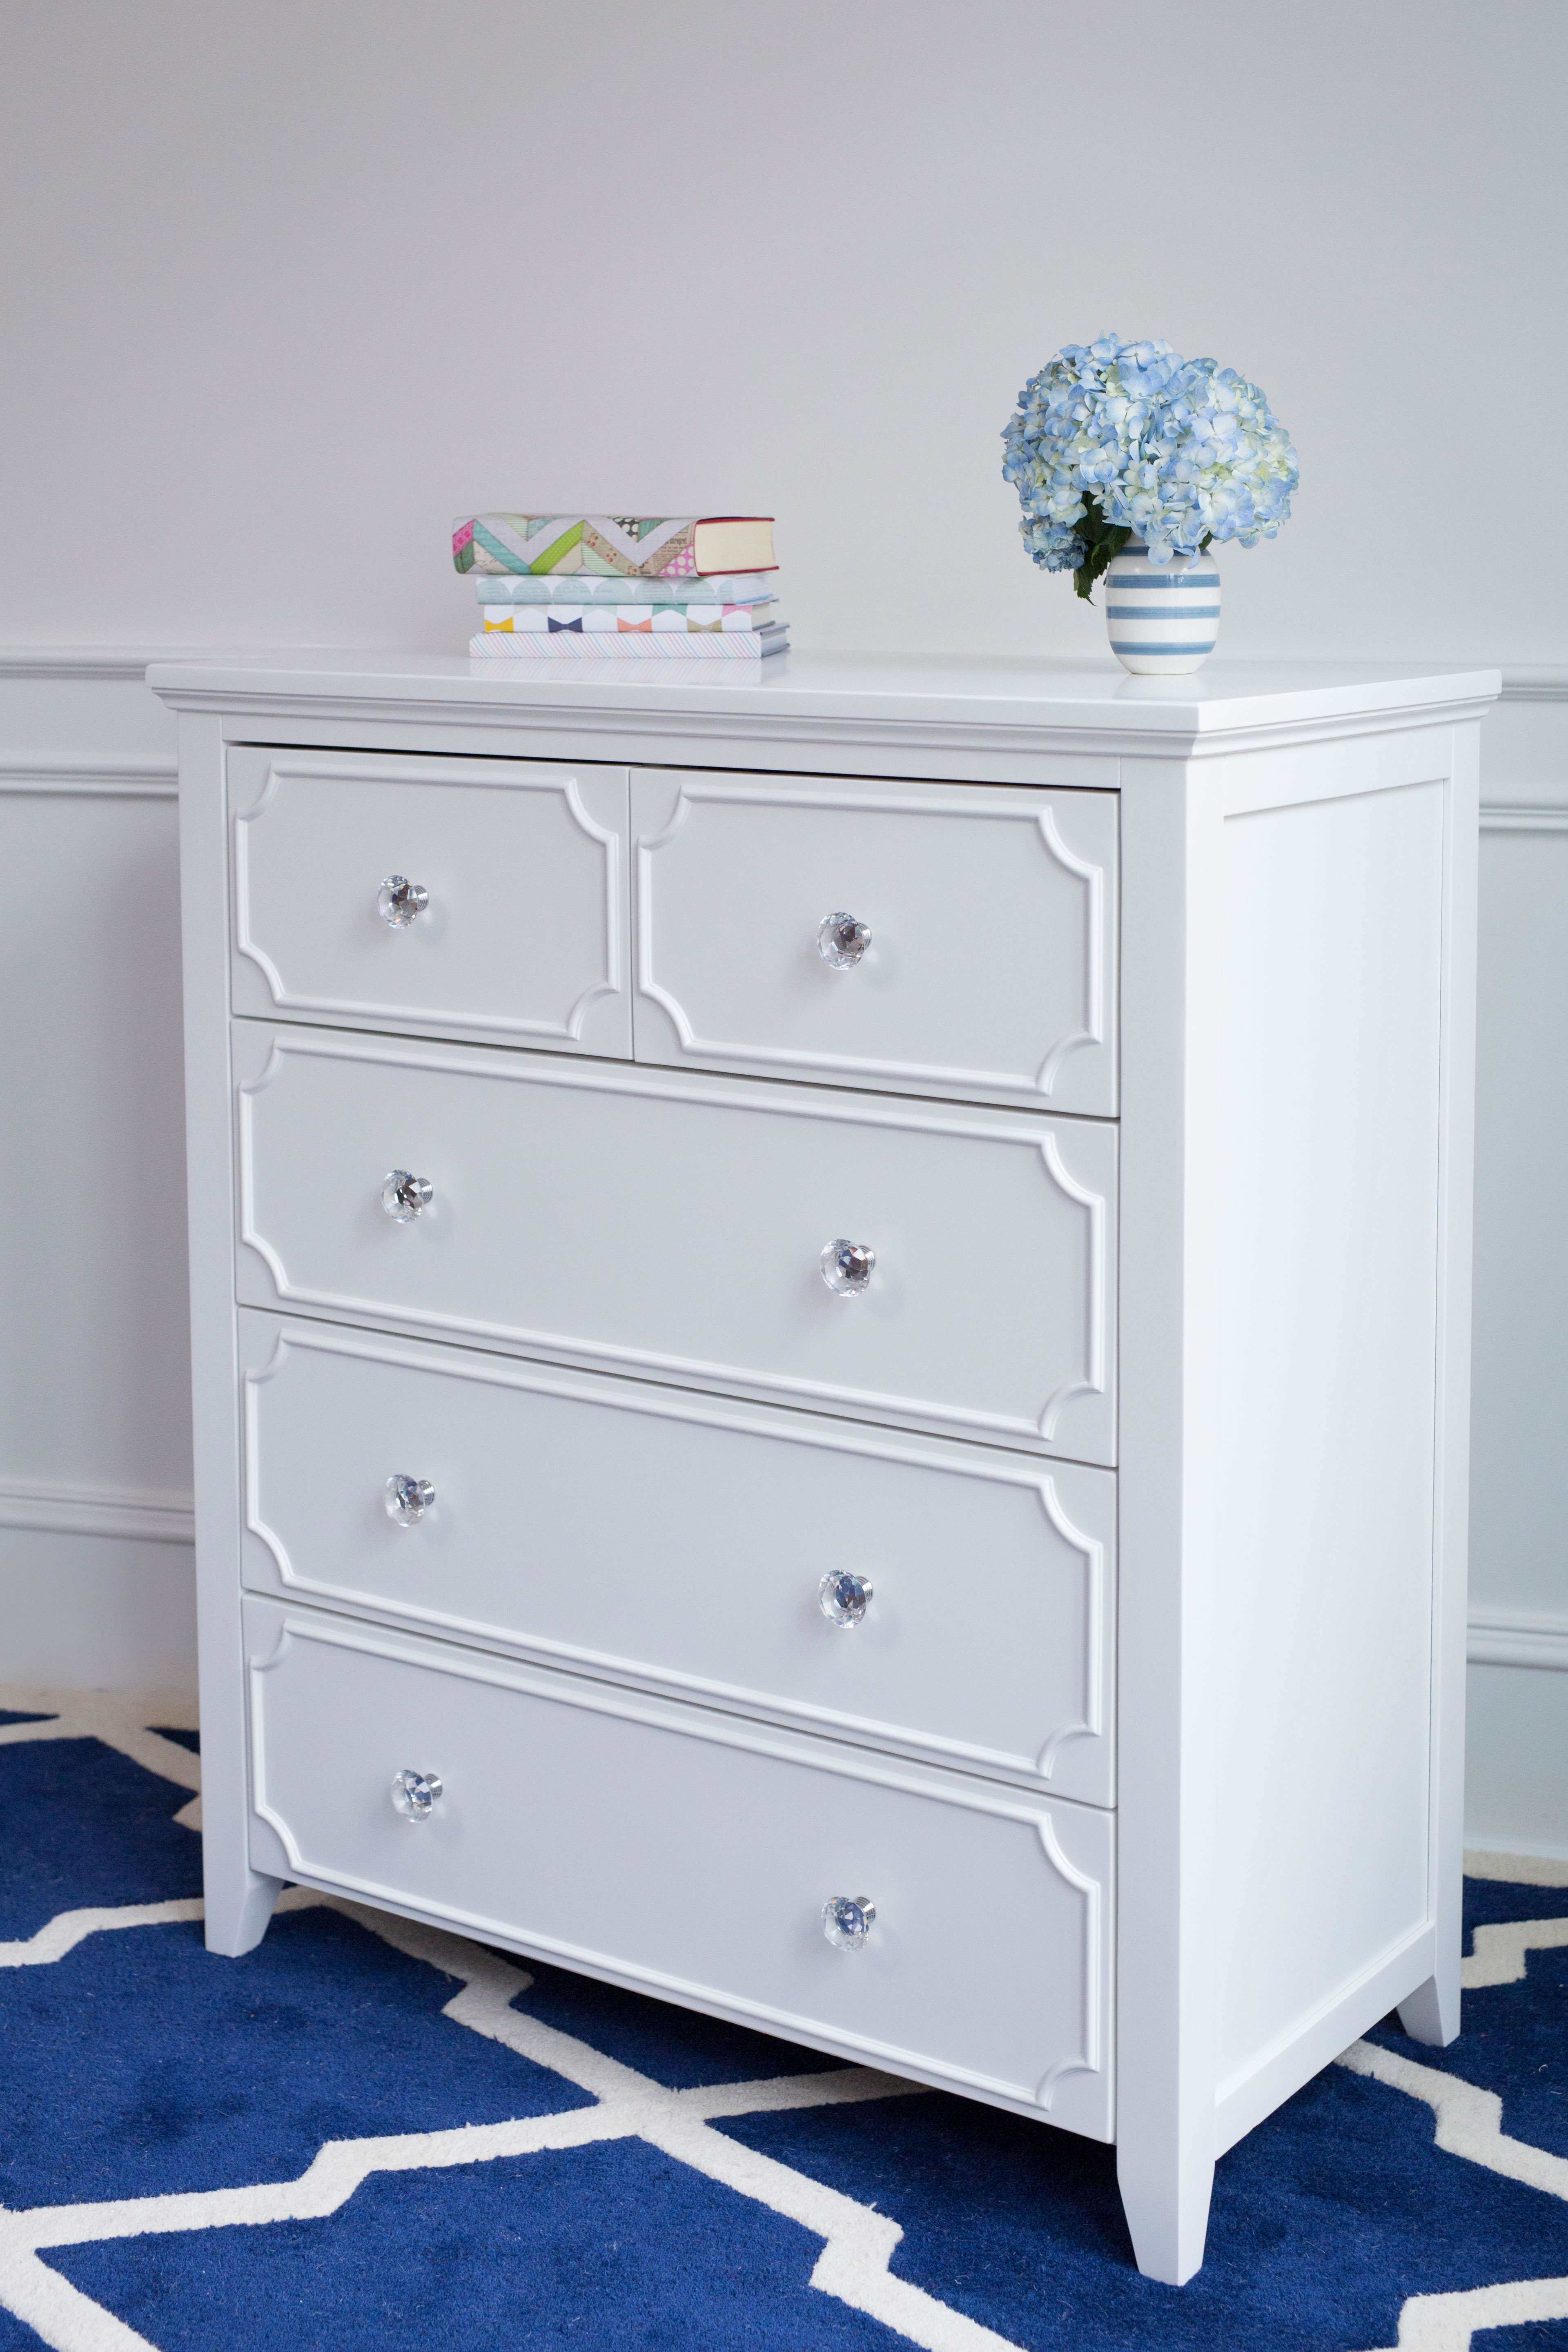 2 Over 3 Drawer Dresser White Craft Bedroom Furniture with regard to dimensions 3840 X 5760